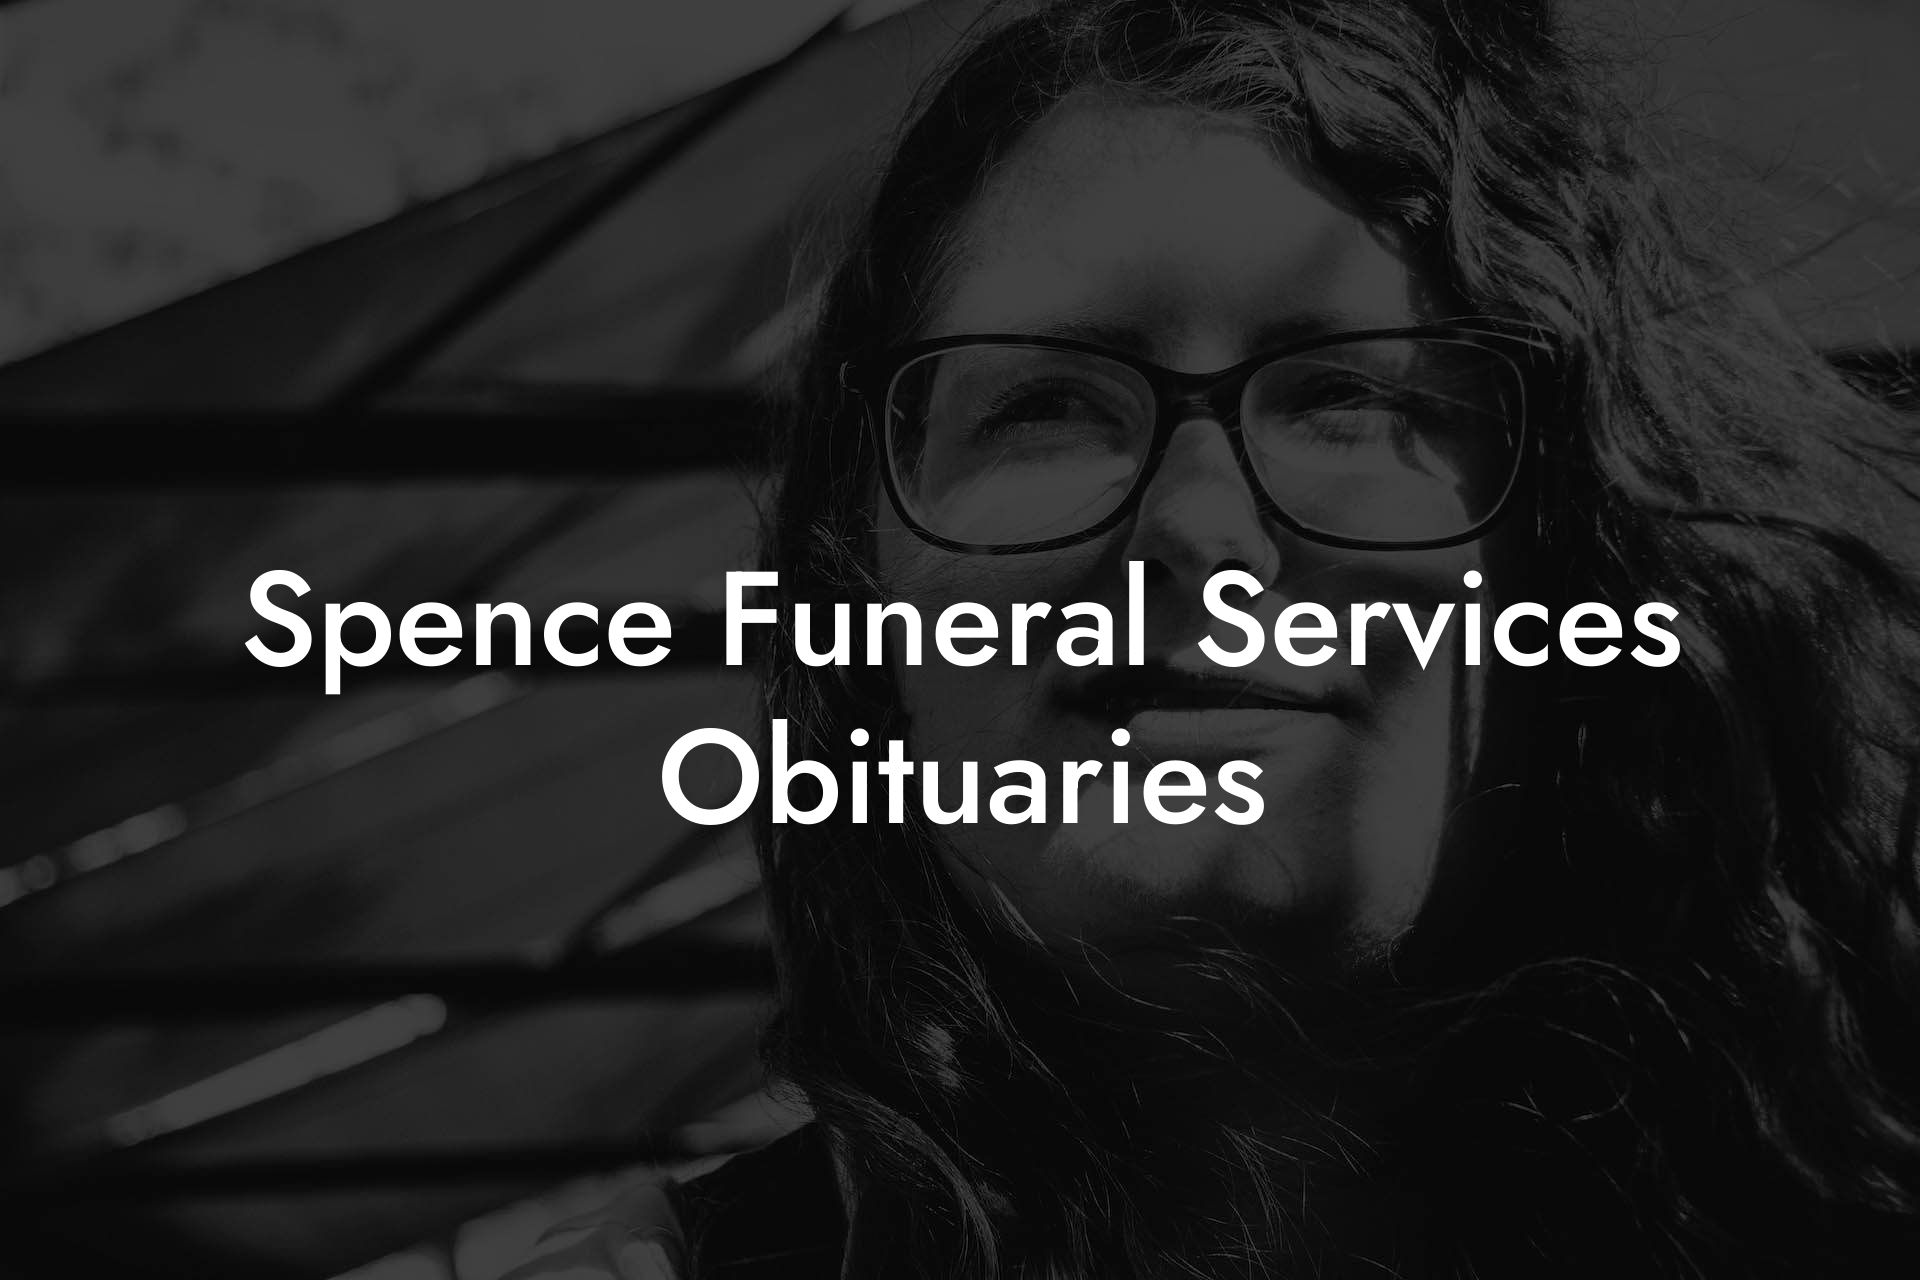 Spence Funeral Services Obituaries